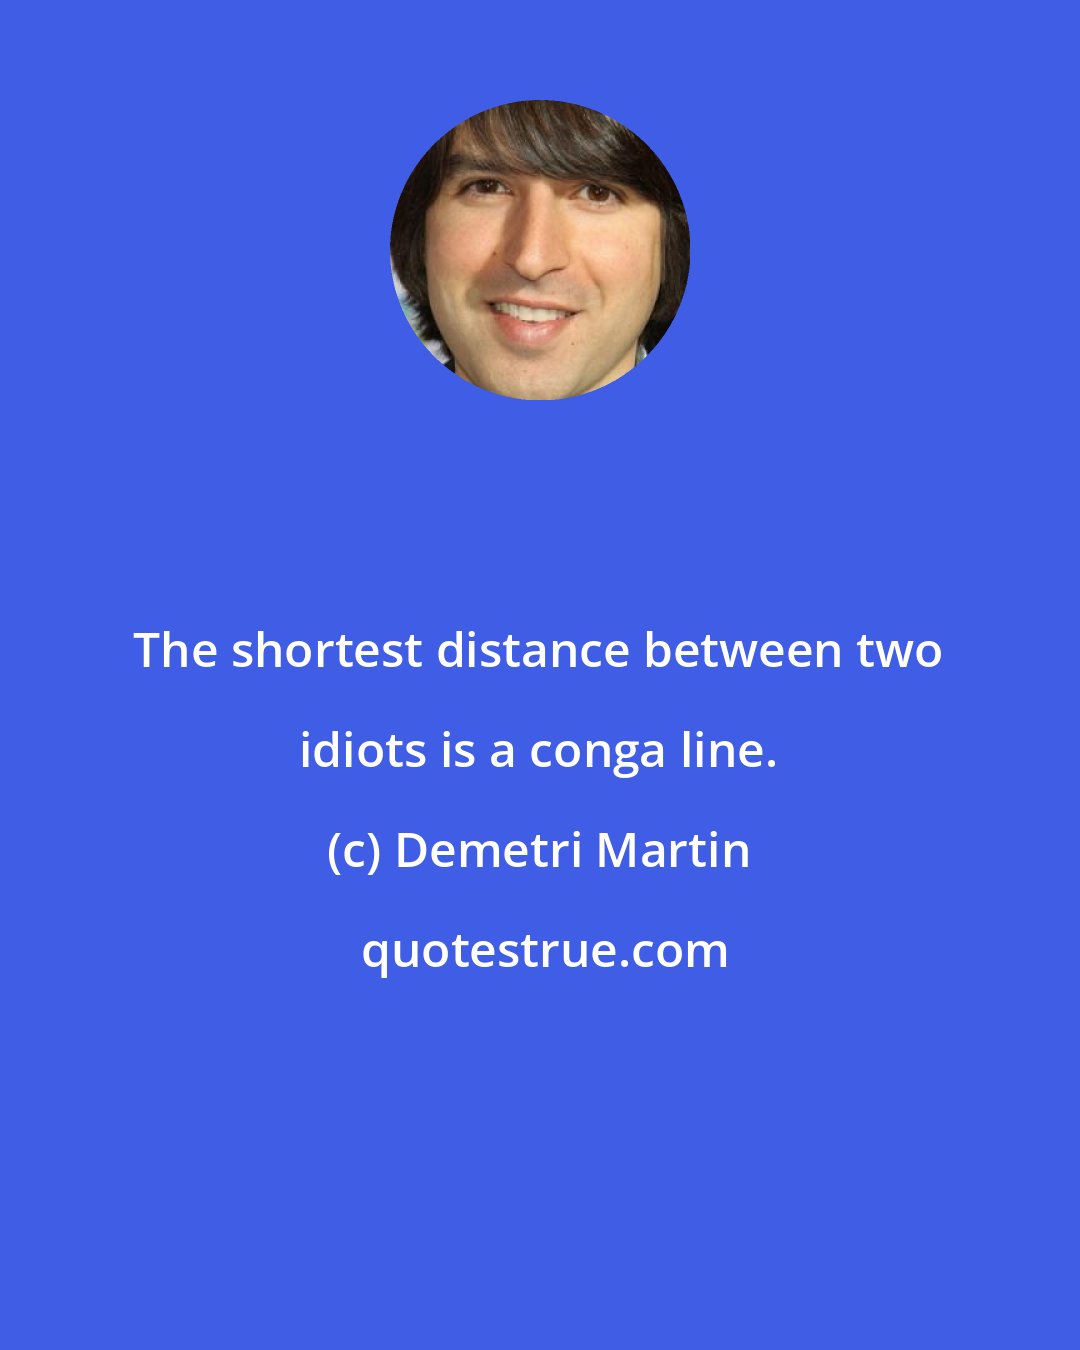 Demetri Martin: The shortest distance between two idiots is a conga line.